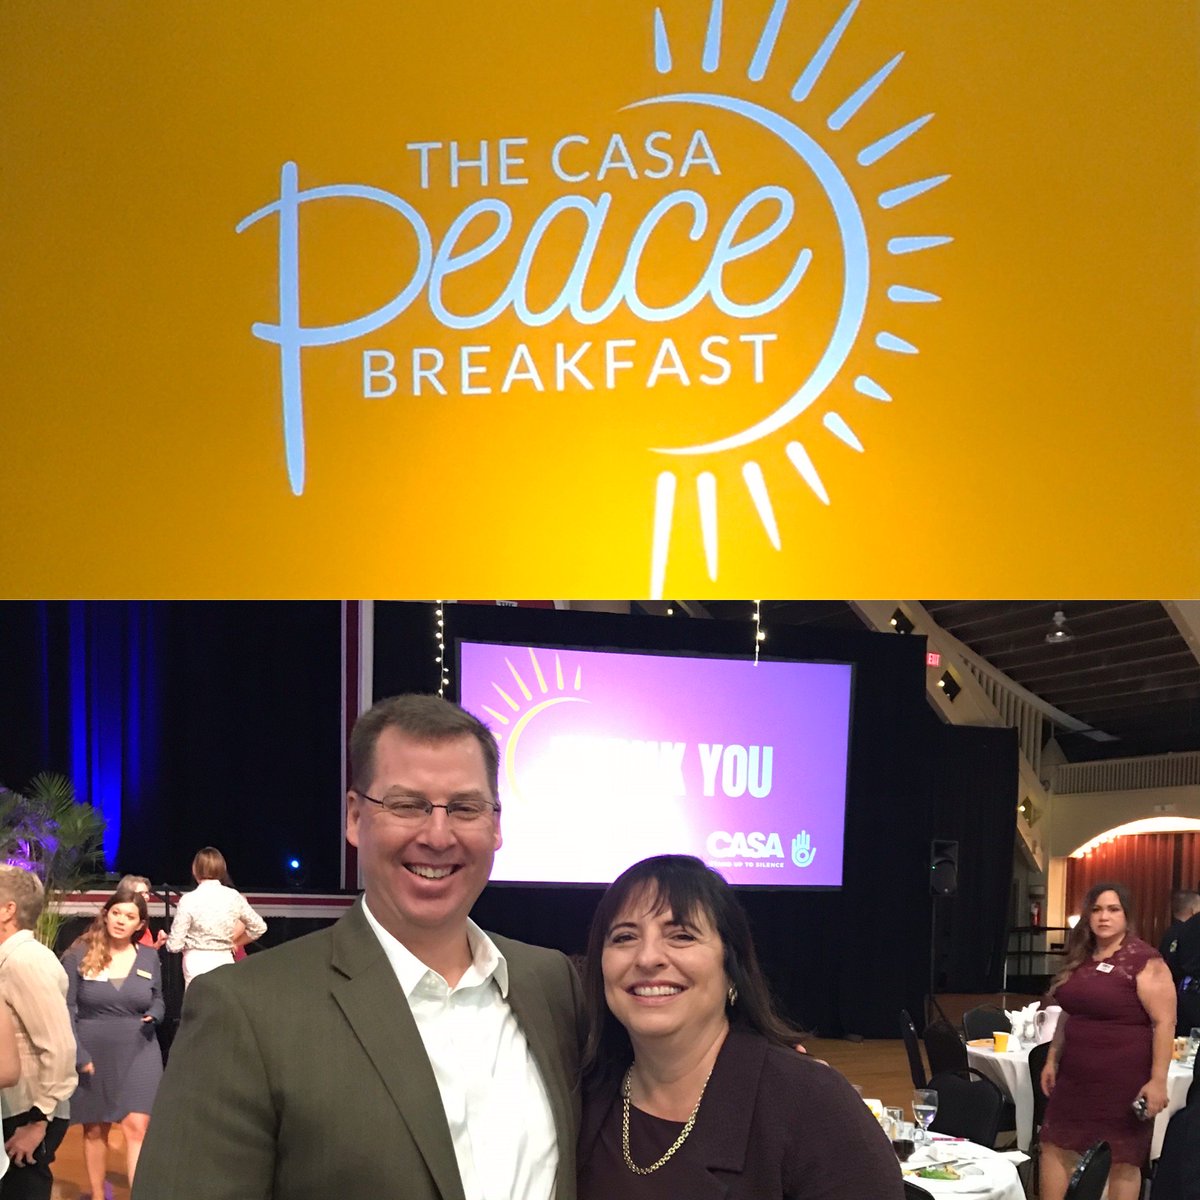 I was grateful to be with @CASAstpete this morning at breakfast. It is a fabulous organization! My great friend Patty is now the Board Chair. She will continue to work tirelessly for them! #standuptosilence #DomesticViolenceAwarenessMonth #pinellascounty